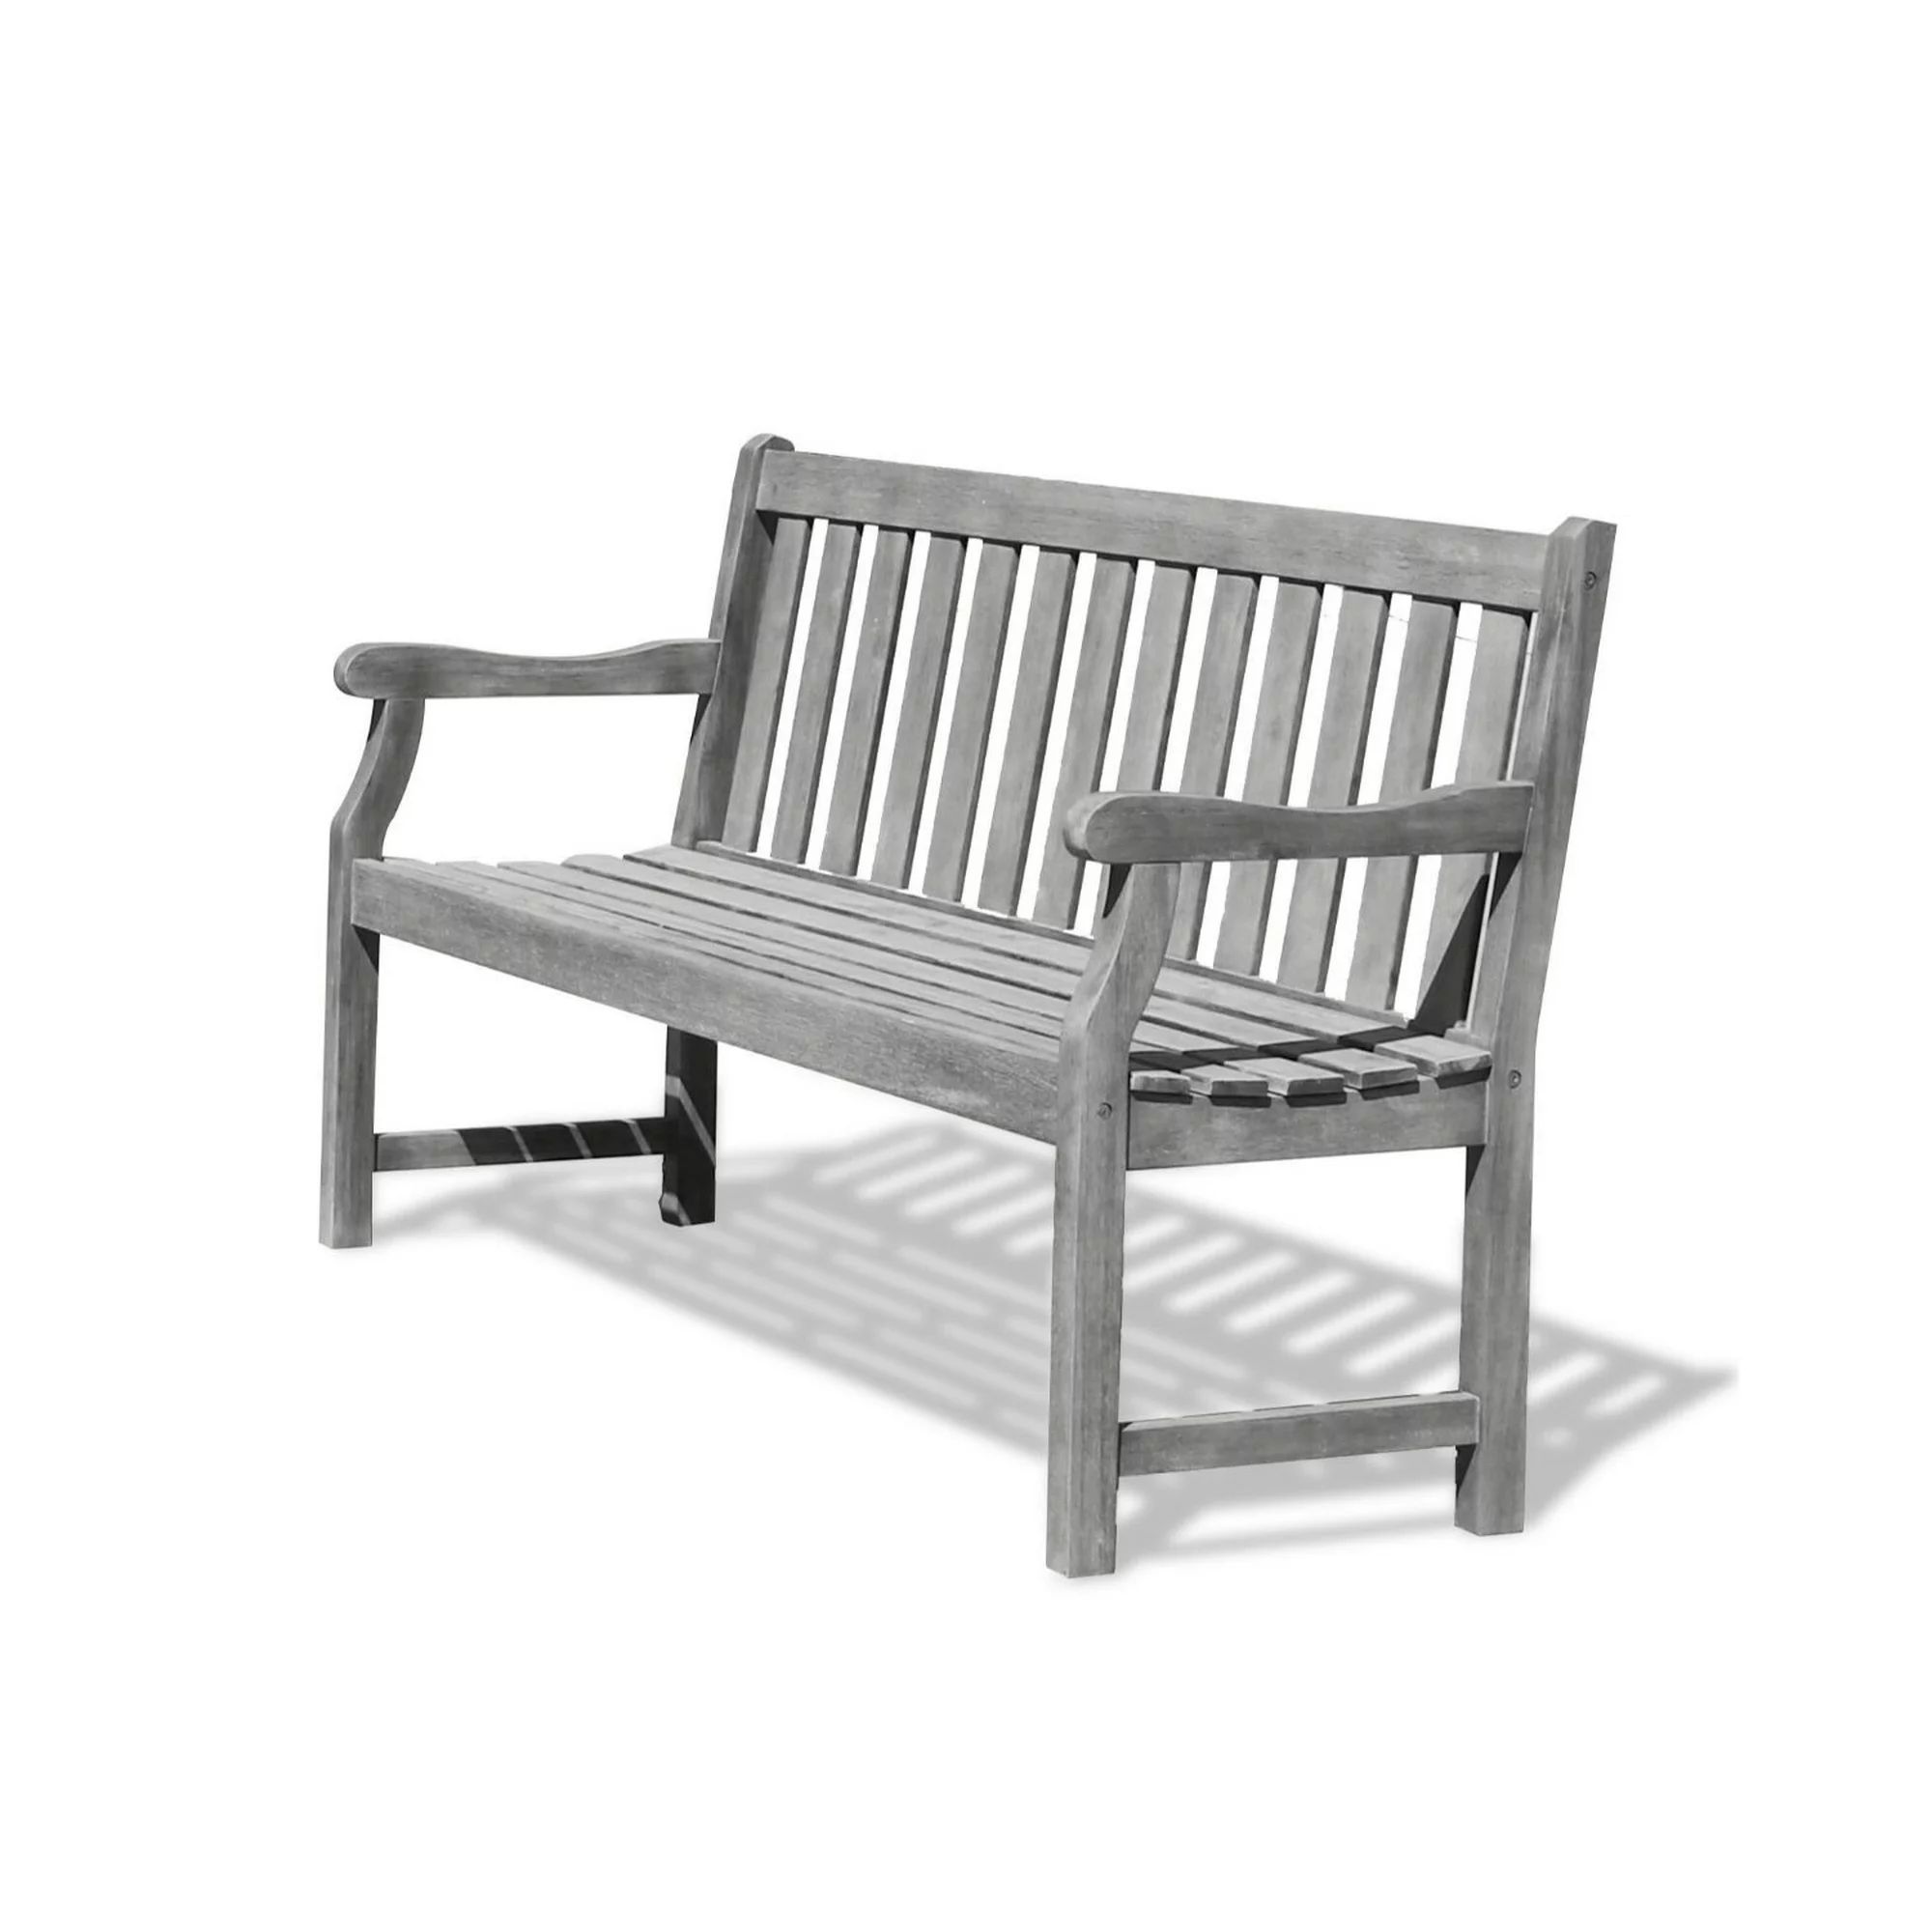 57" Gray Hand Scraped Wood Finish Striped Back Outdoor Furniture Patio Bench | Walmart (US)